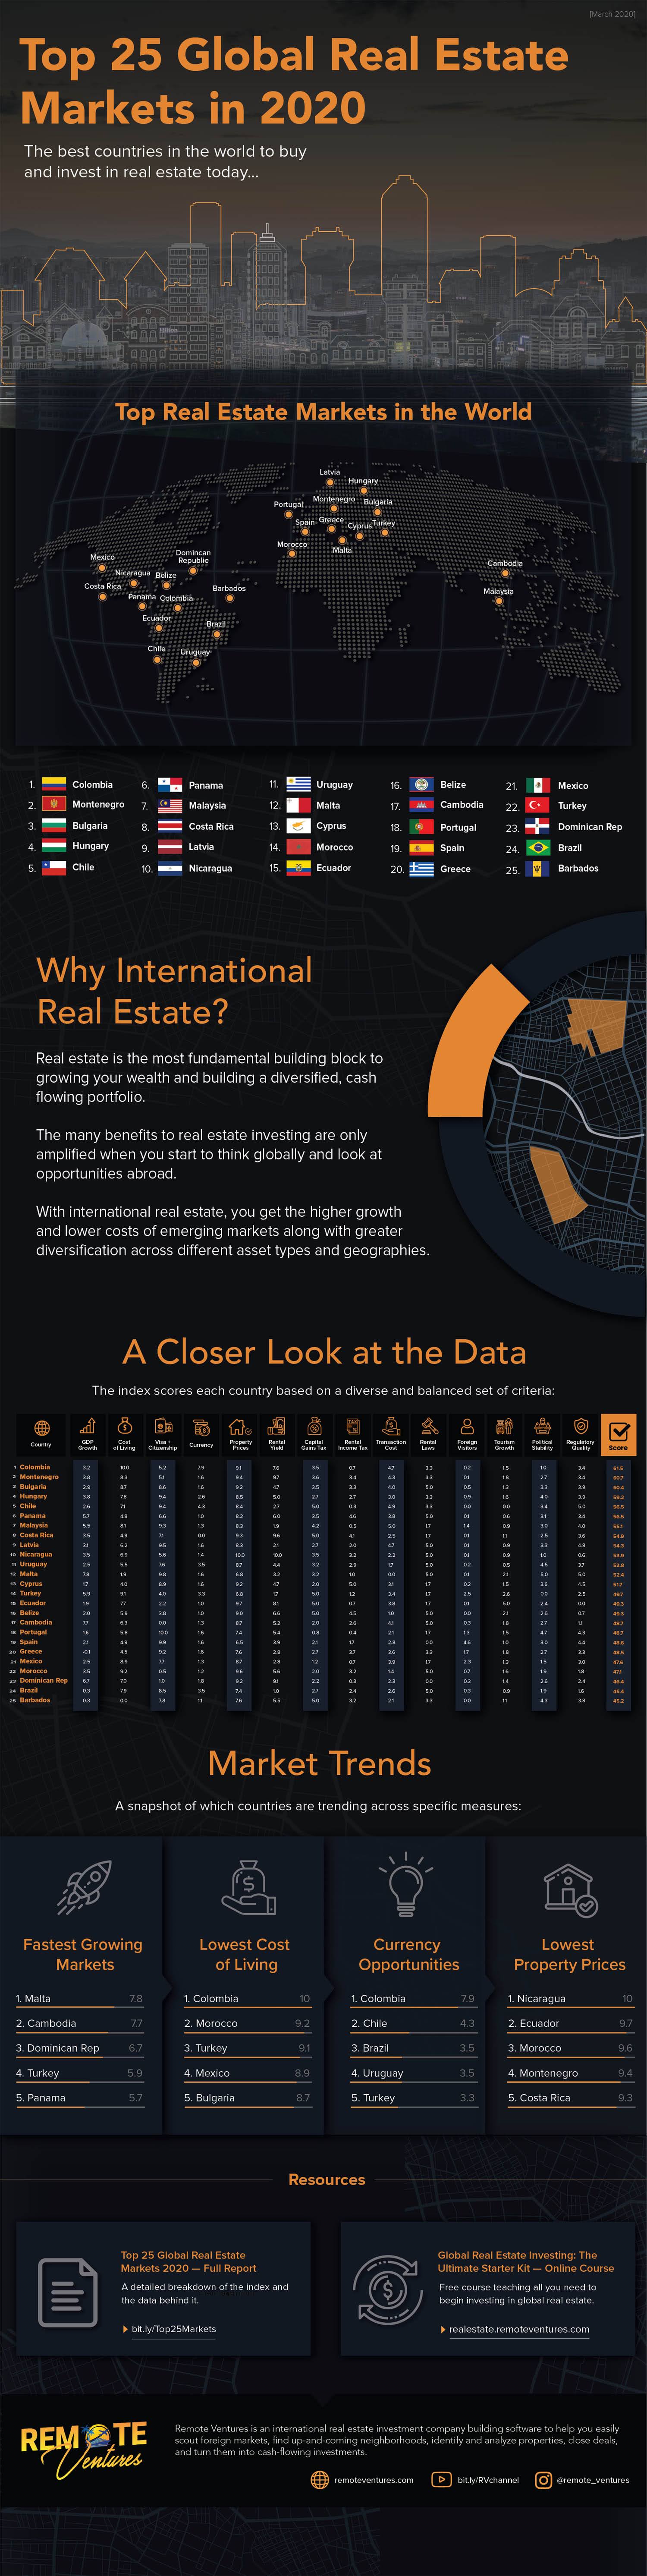 Top 25 Global Real Estate Markets in 2020 #infographic